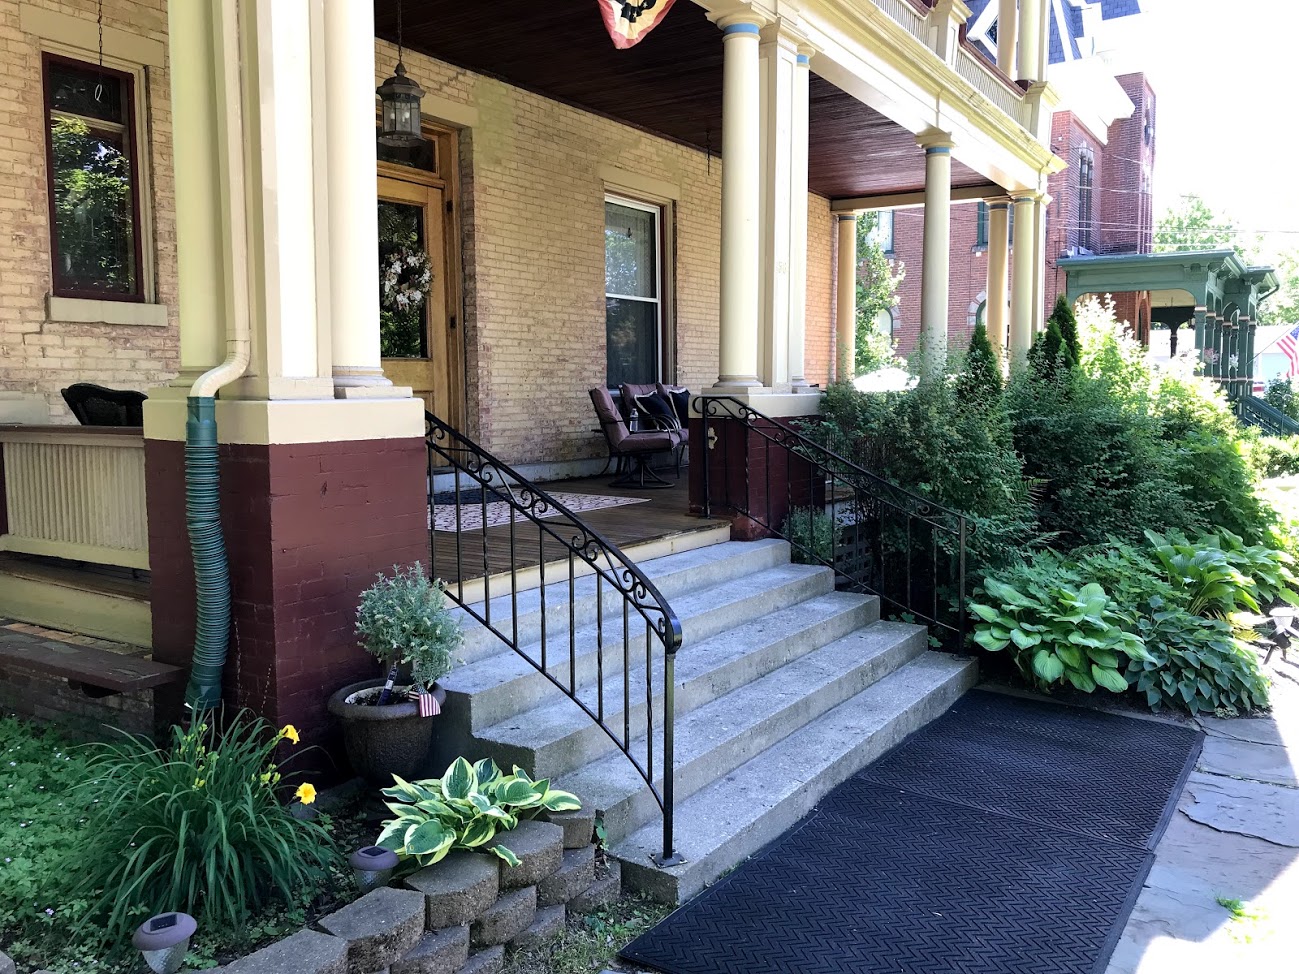 Front Steps of the Barristers B&B. Flowers are in full bloom